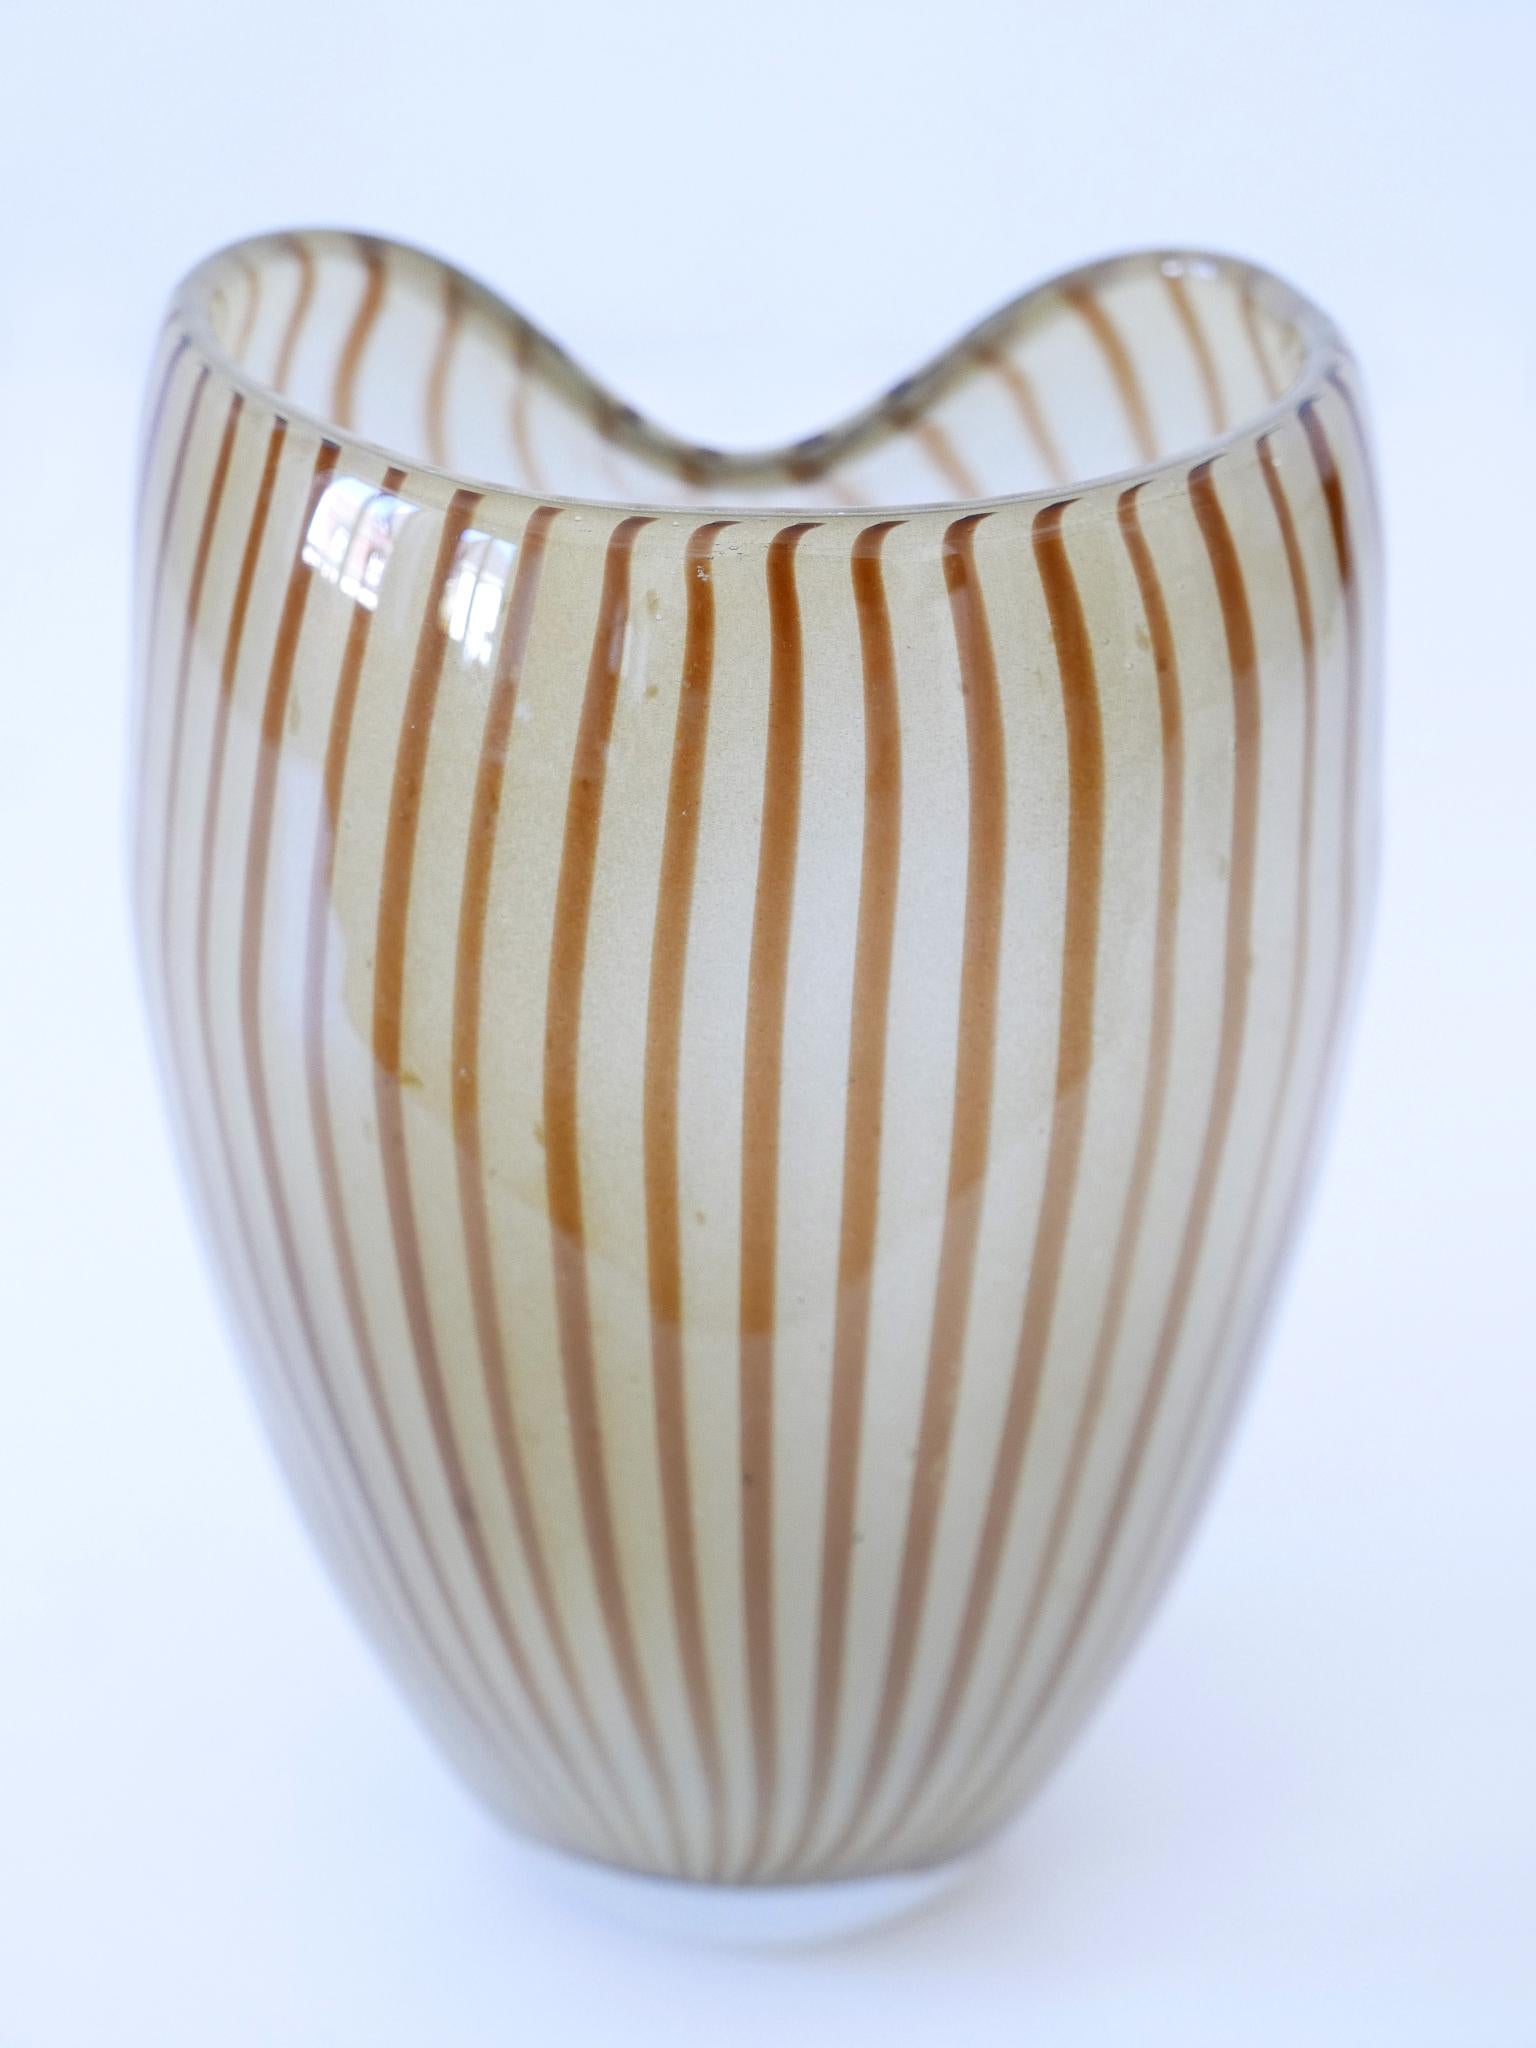 Decorative Mid Century Modern Murano Glass Vase Italy 1960s  For Sale 2